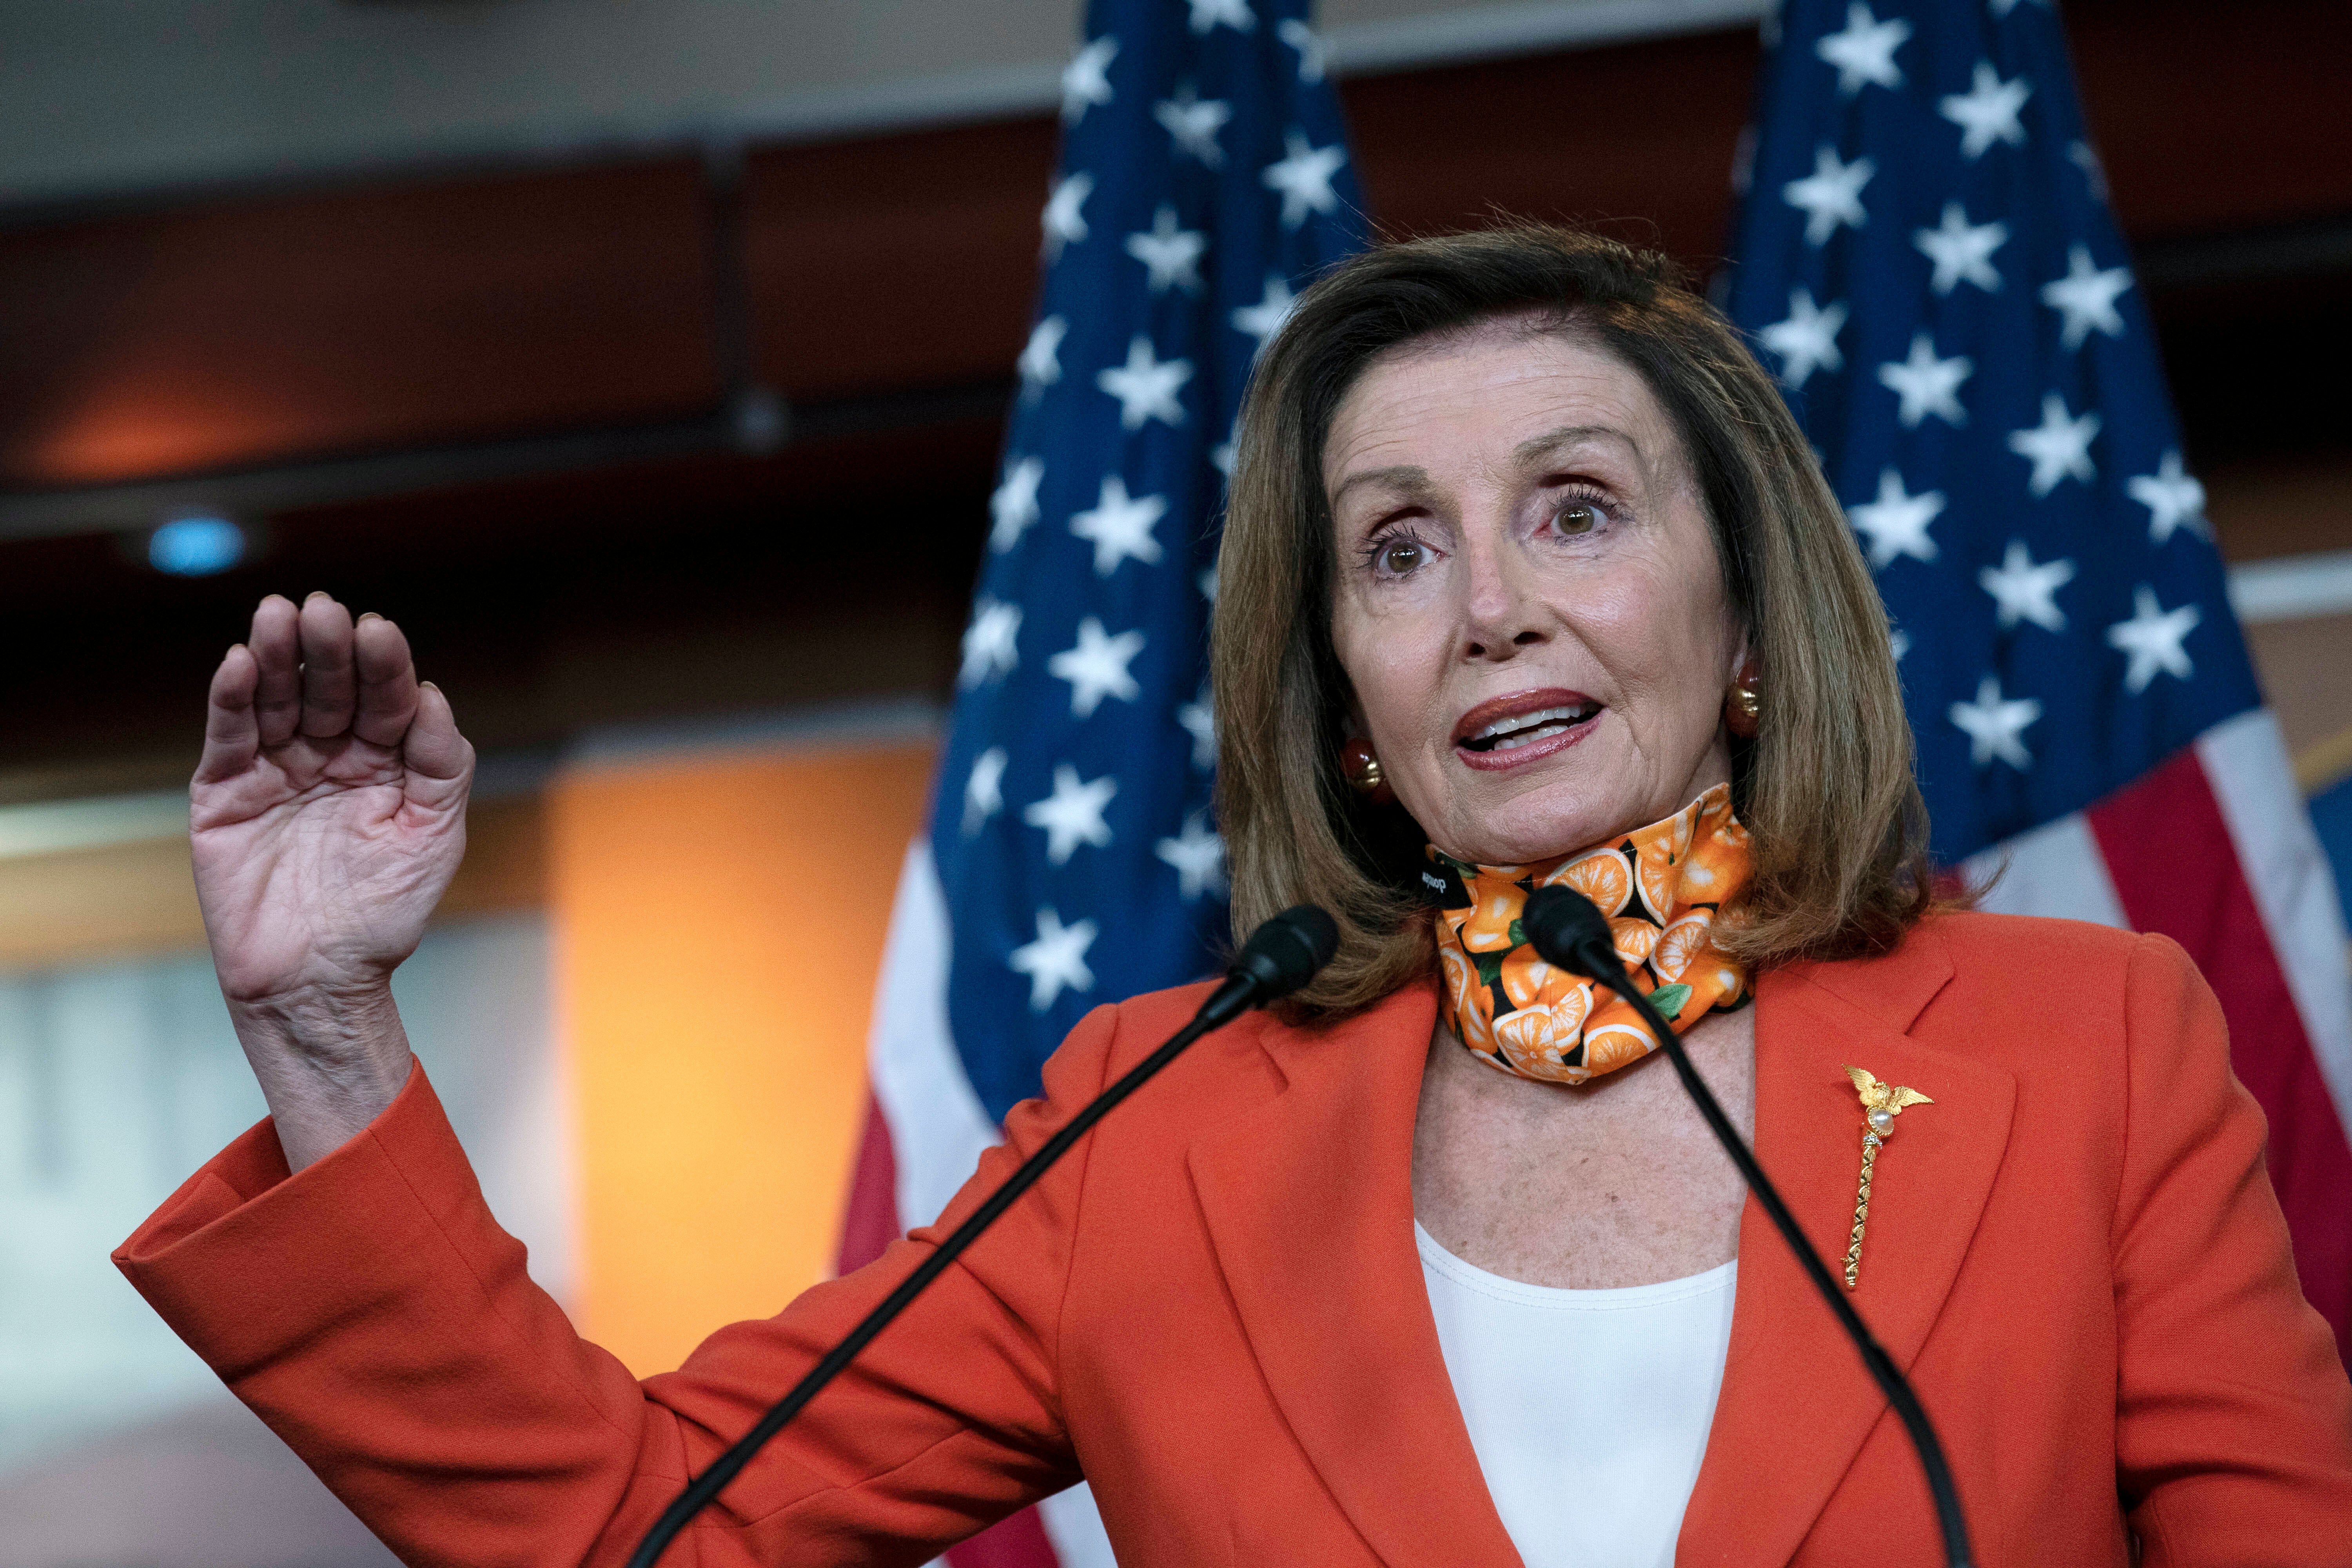 Speaker Pelosi took a jab at coronavirus-positive Donald Trump for delaying economic stimulus talks until after the election.